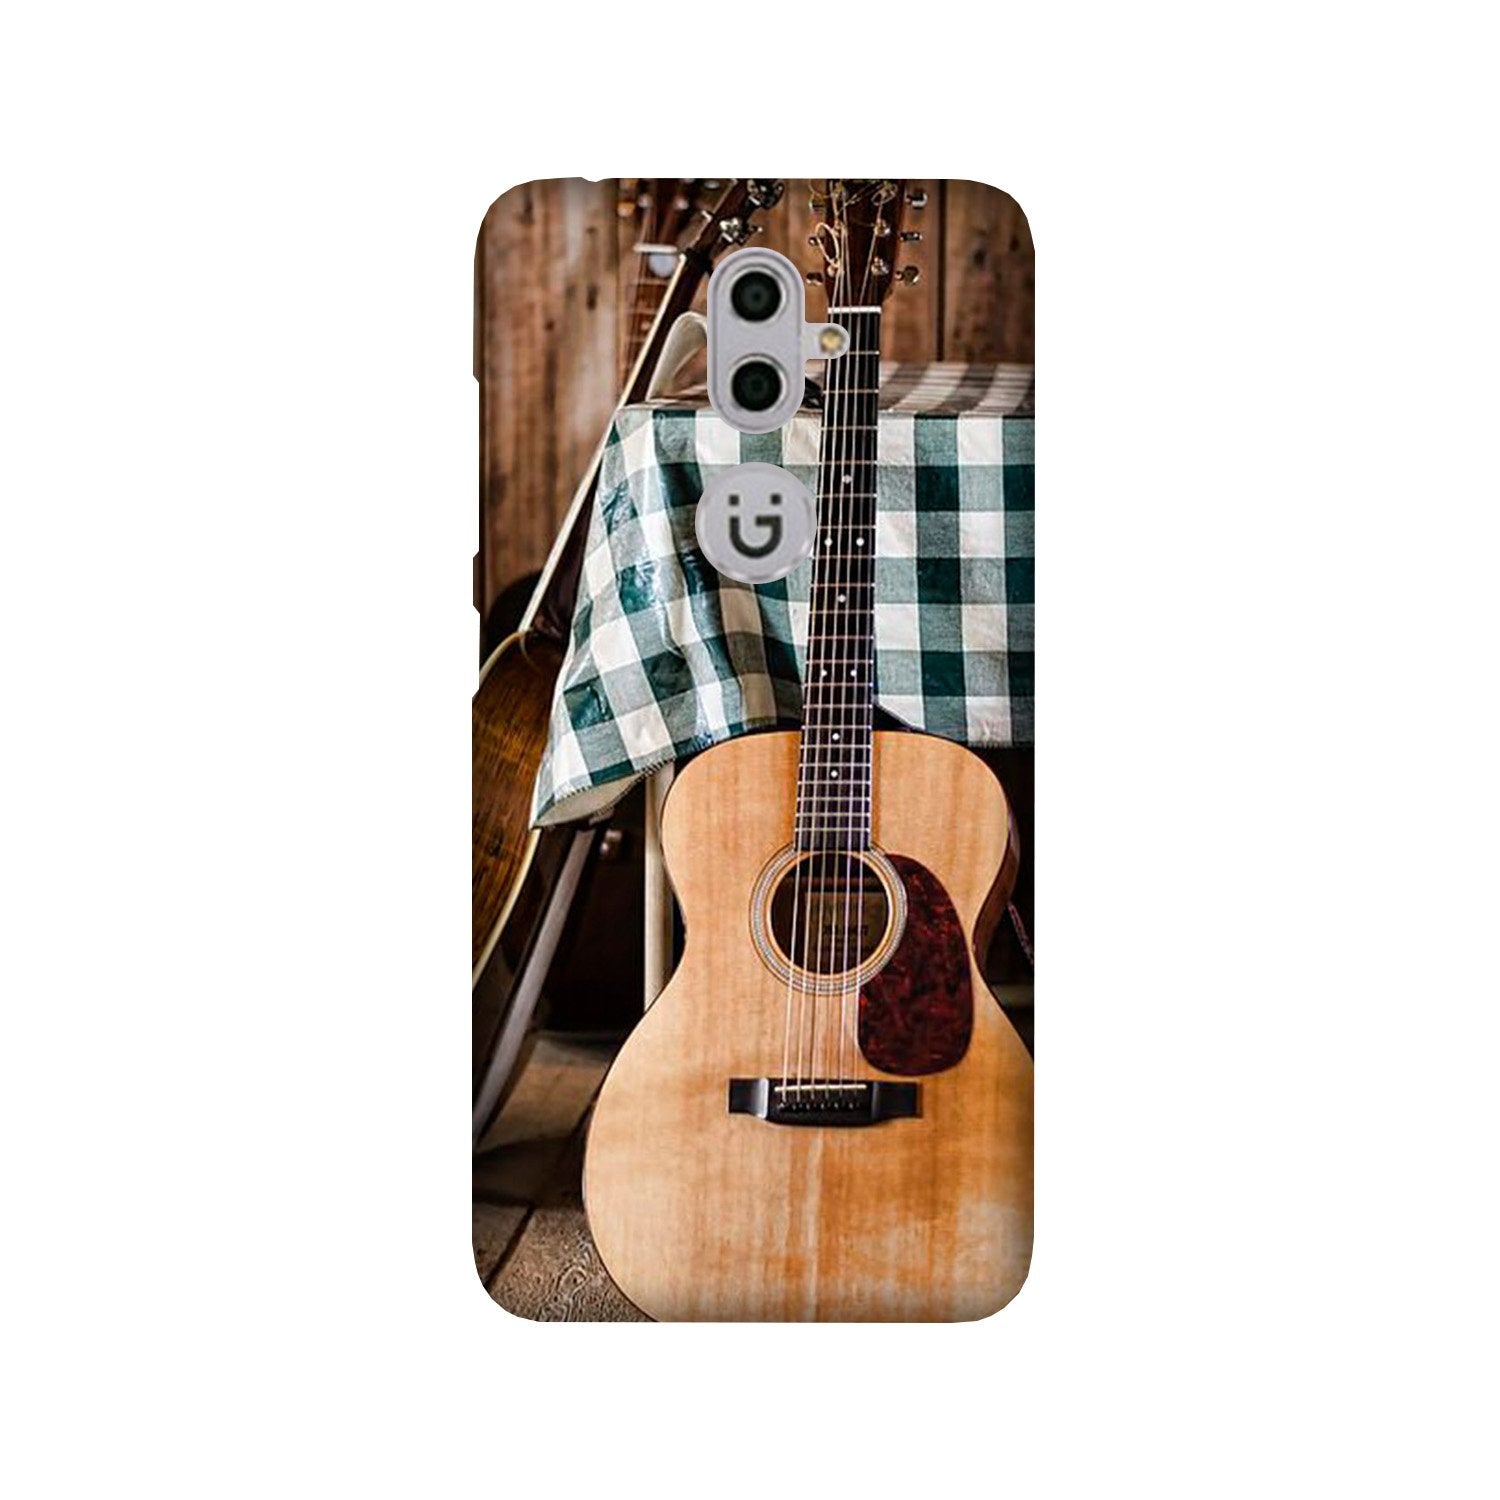 Guitar2 Case for Gionee S9